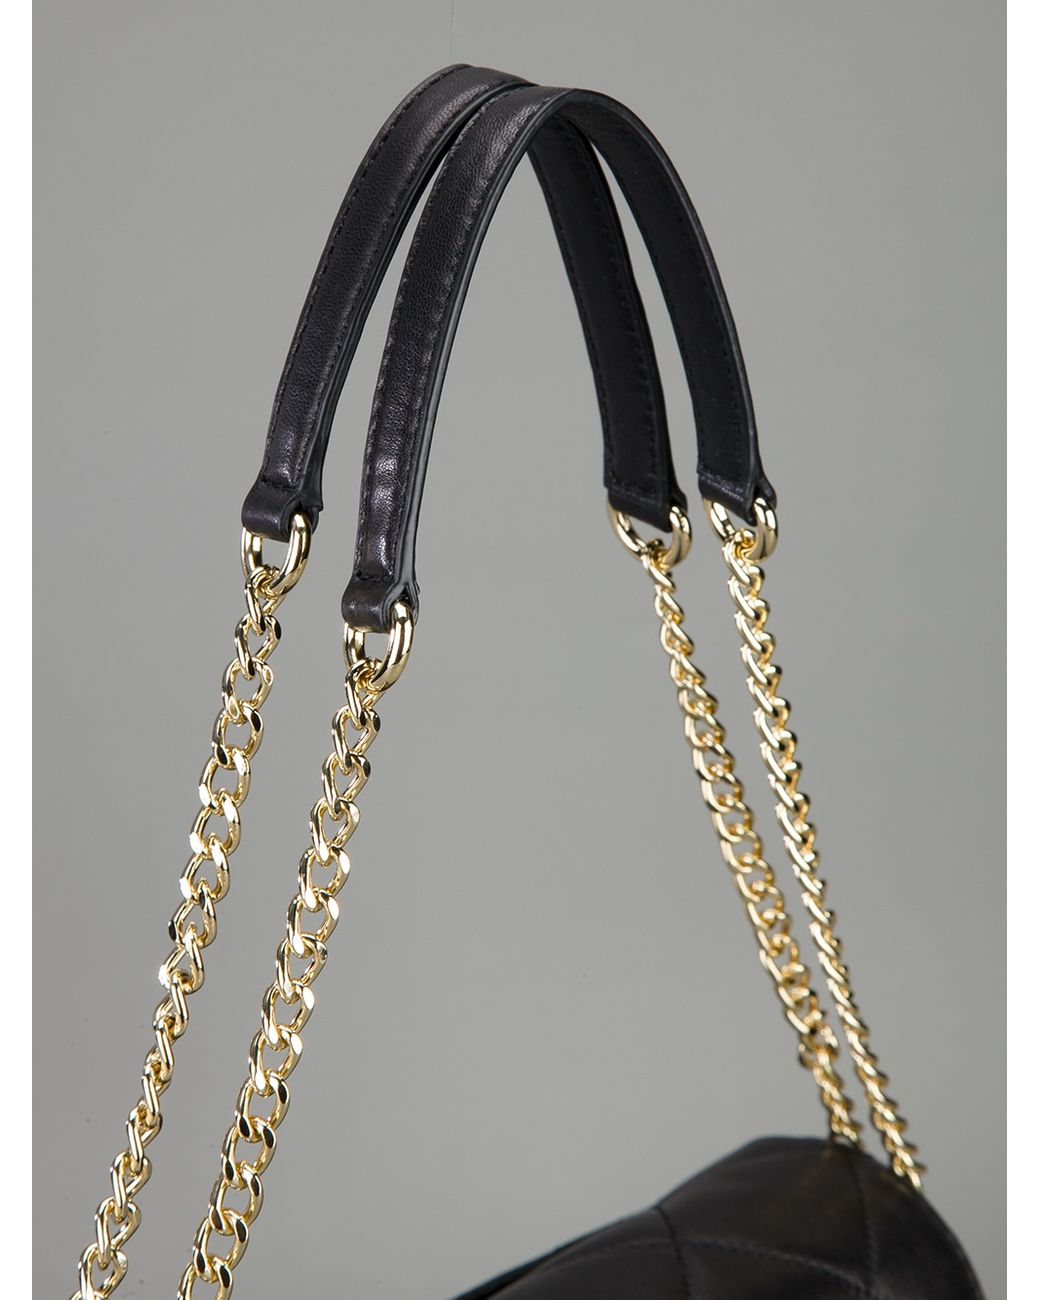 Black & Gold Chain Strap for handbags or cross body bags from Saben